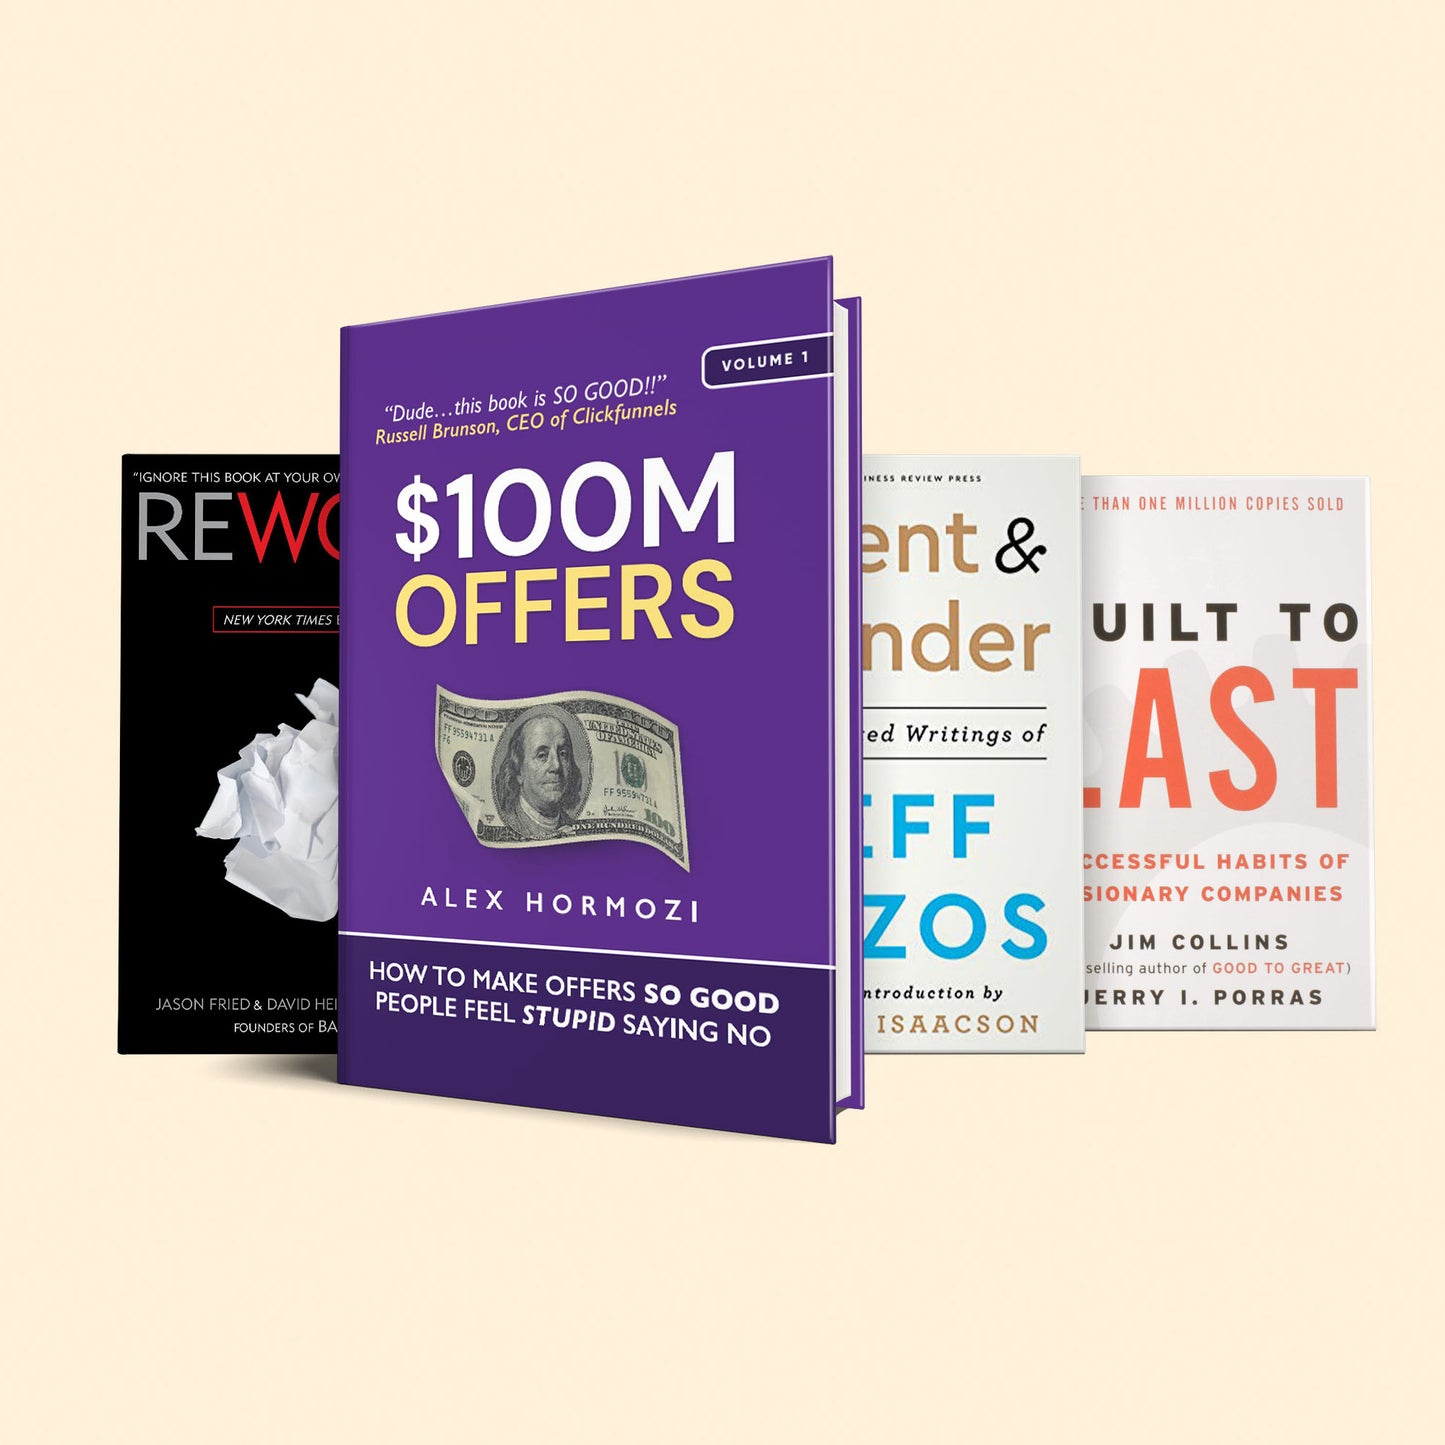 4 Books to master the art of business: ($100M Offers, invent & wander, Rework, Built to last)